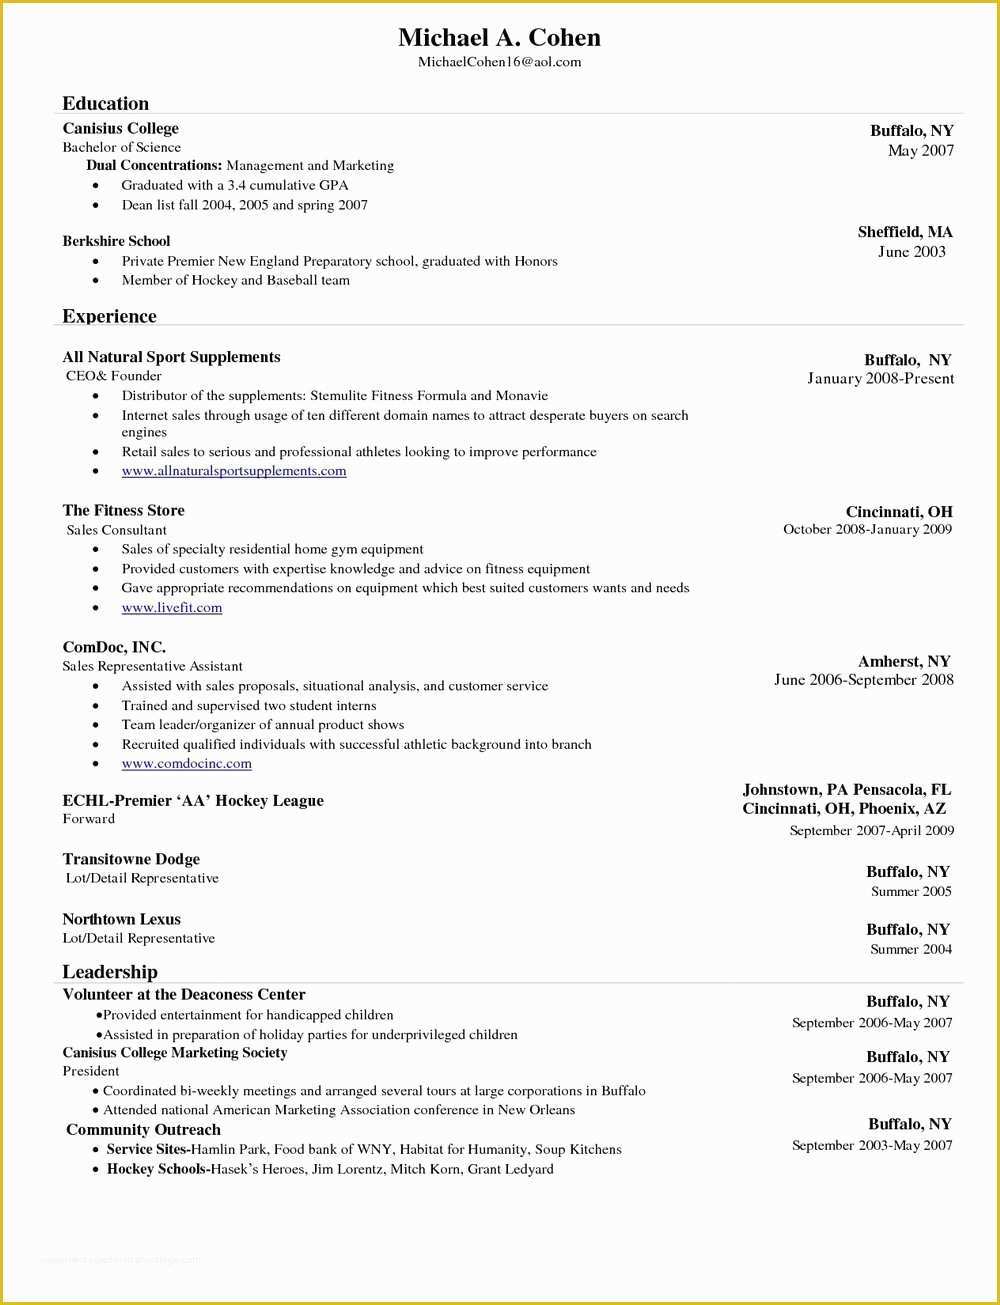 Functional Resume Template Free Download Of Functional Resume Template Free Download Resumes 297